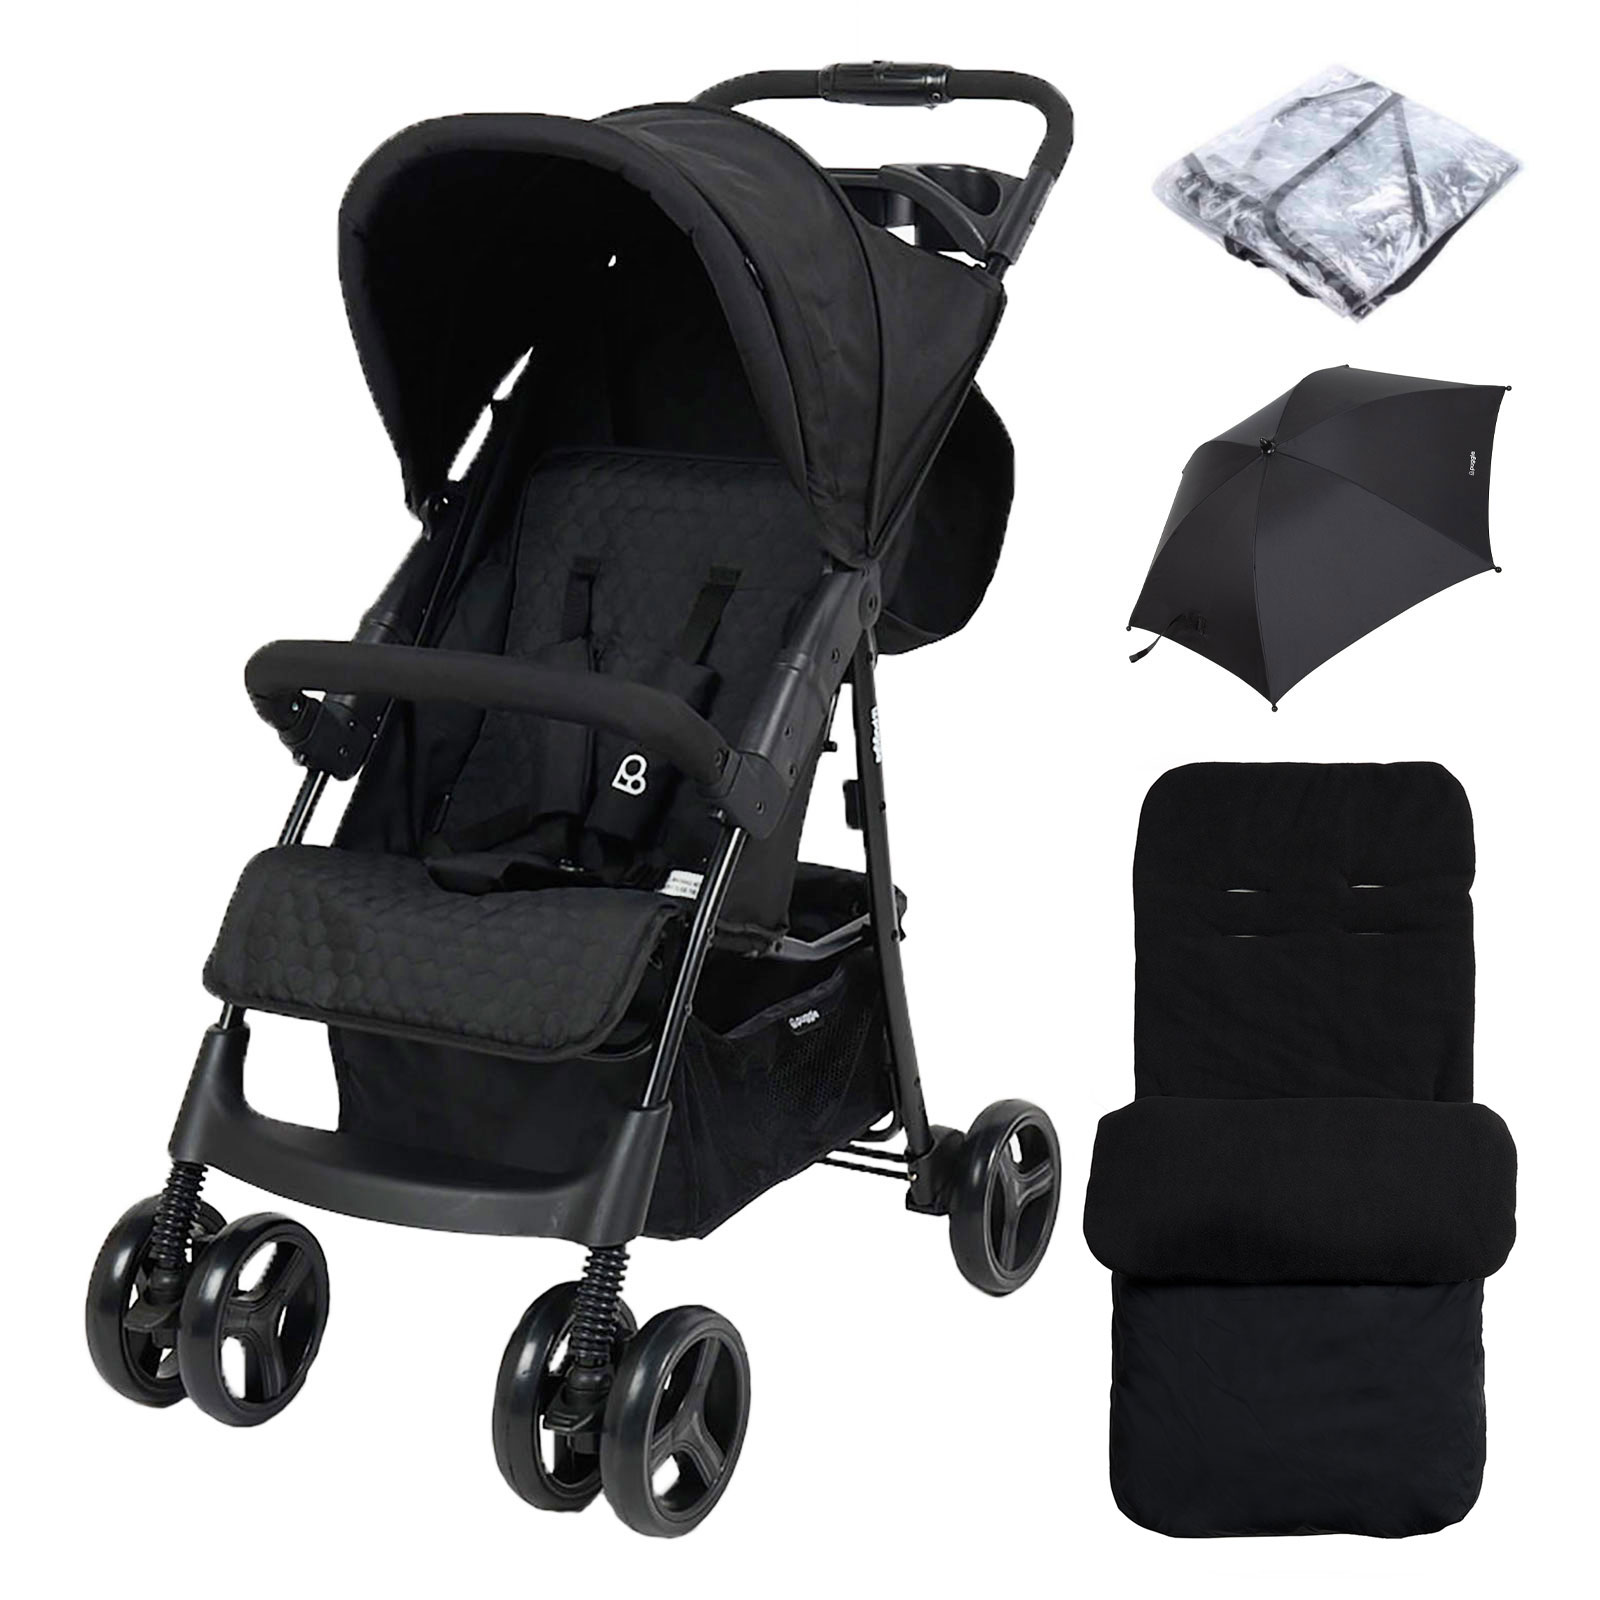 Puggle Starmax Pushchair Stroller with Raincover, Universal Deluxe Footmuff and Parasol – Storm Black